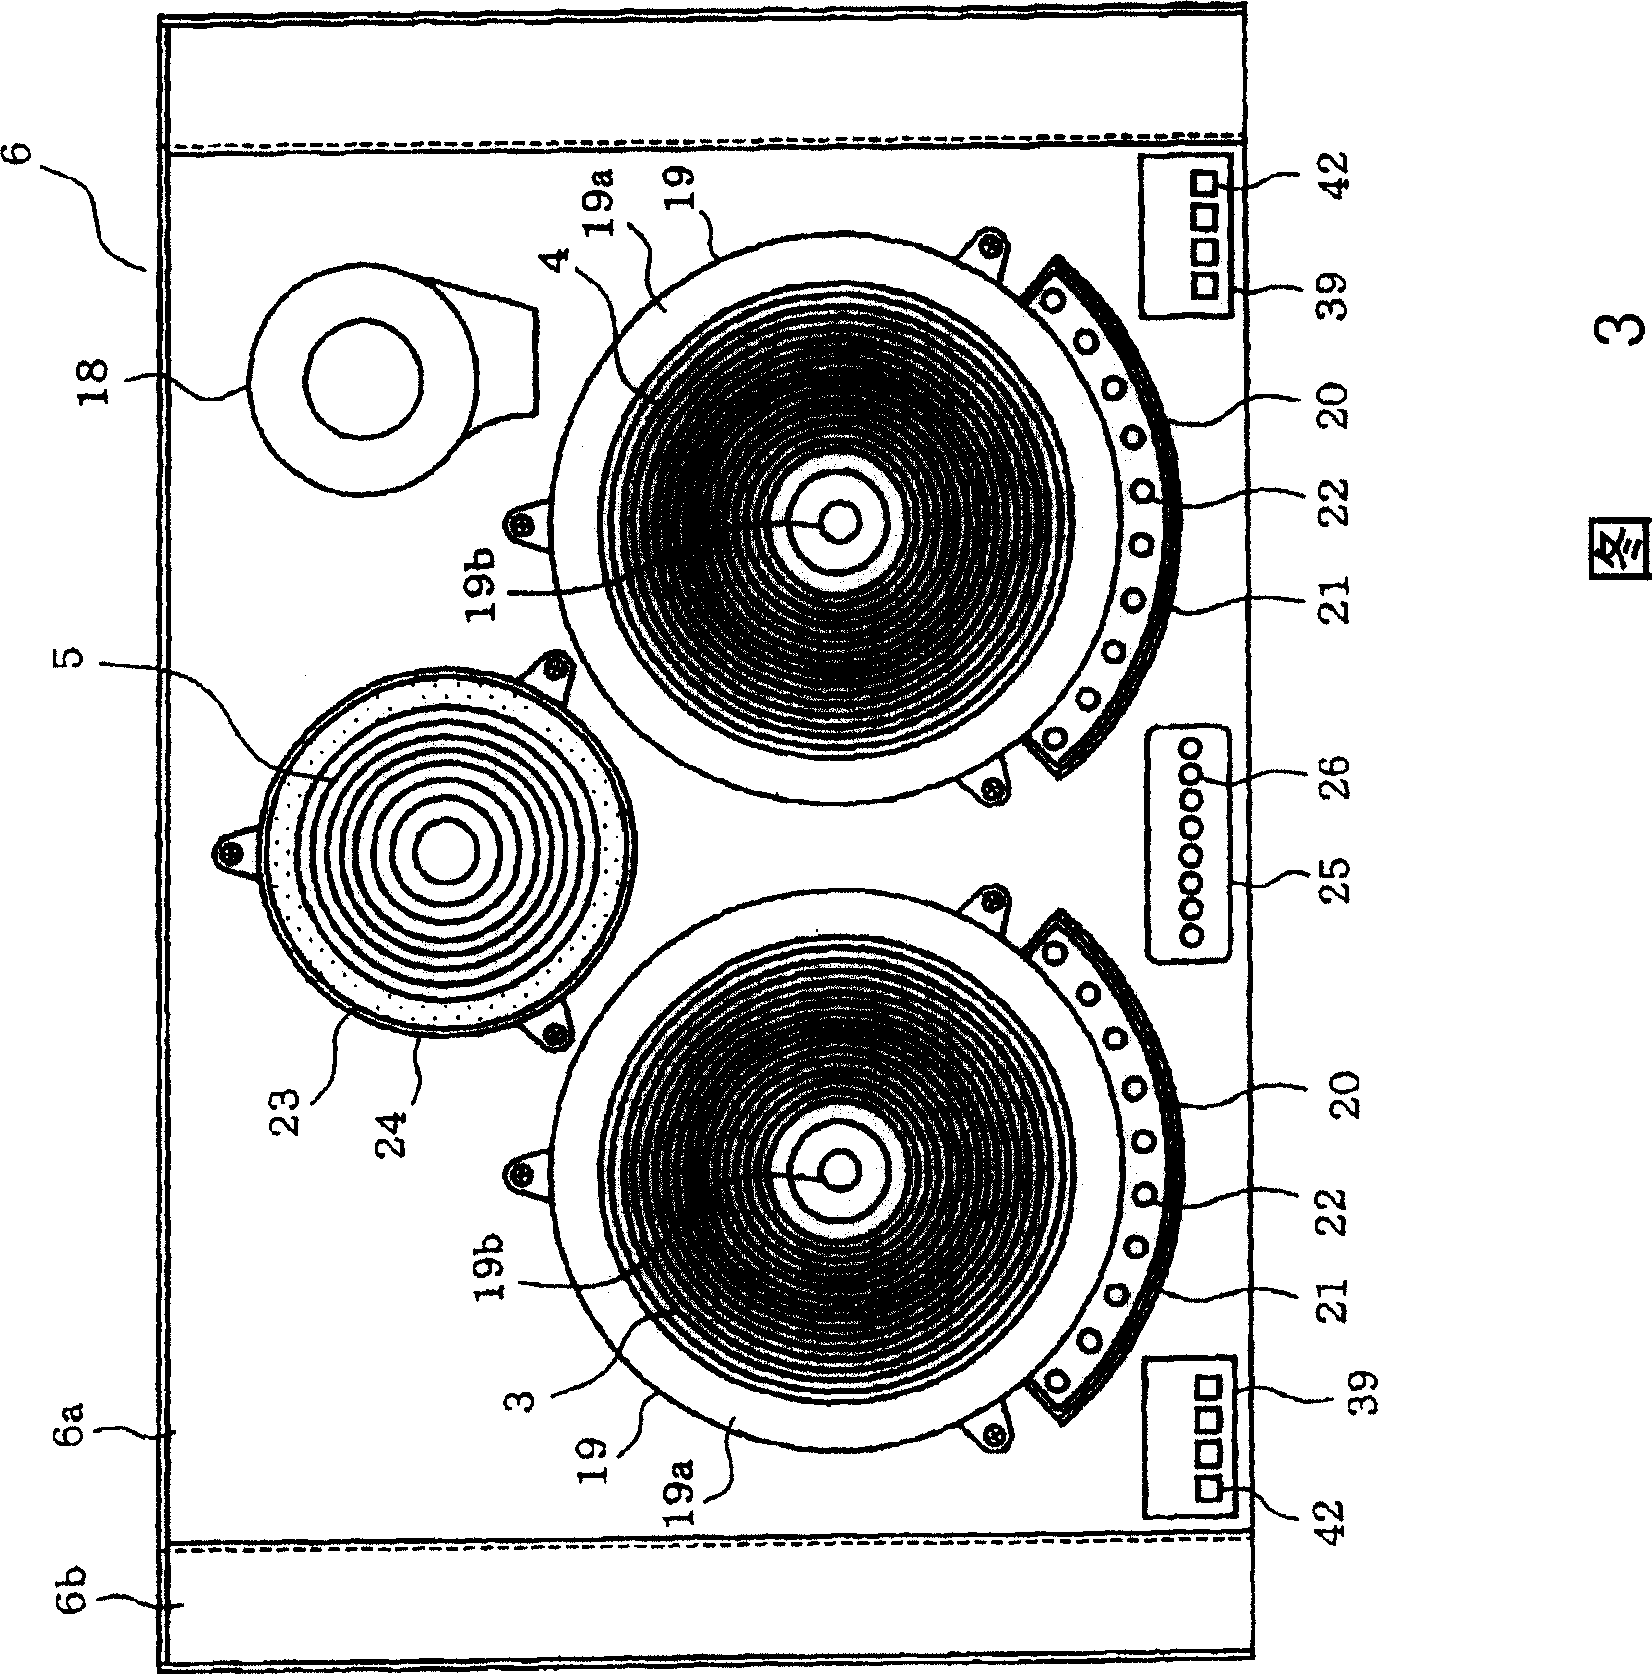 Induction heating cooking device